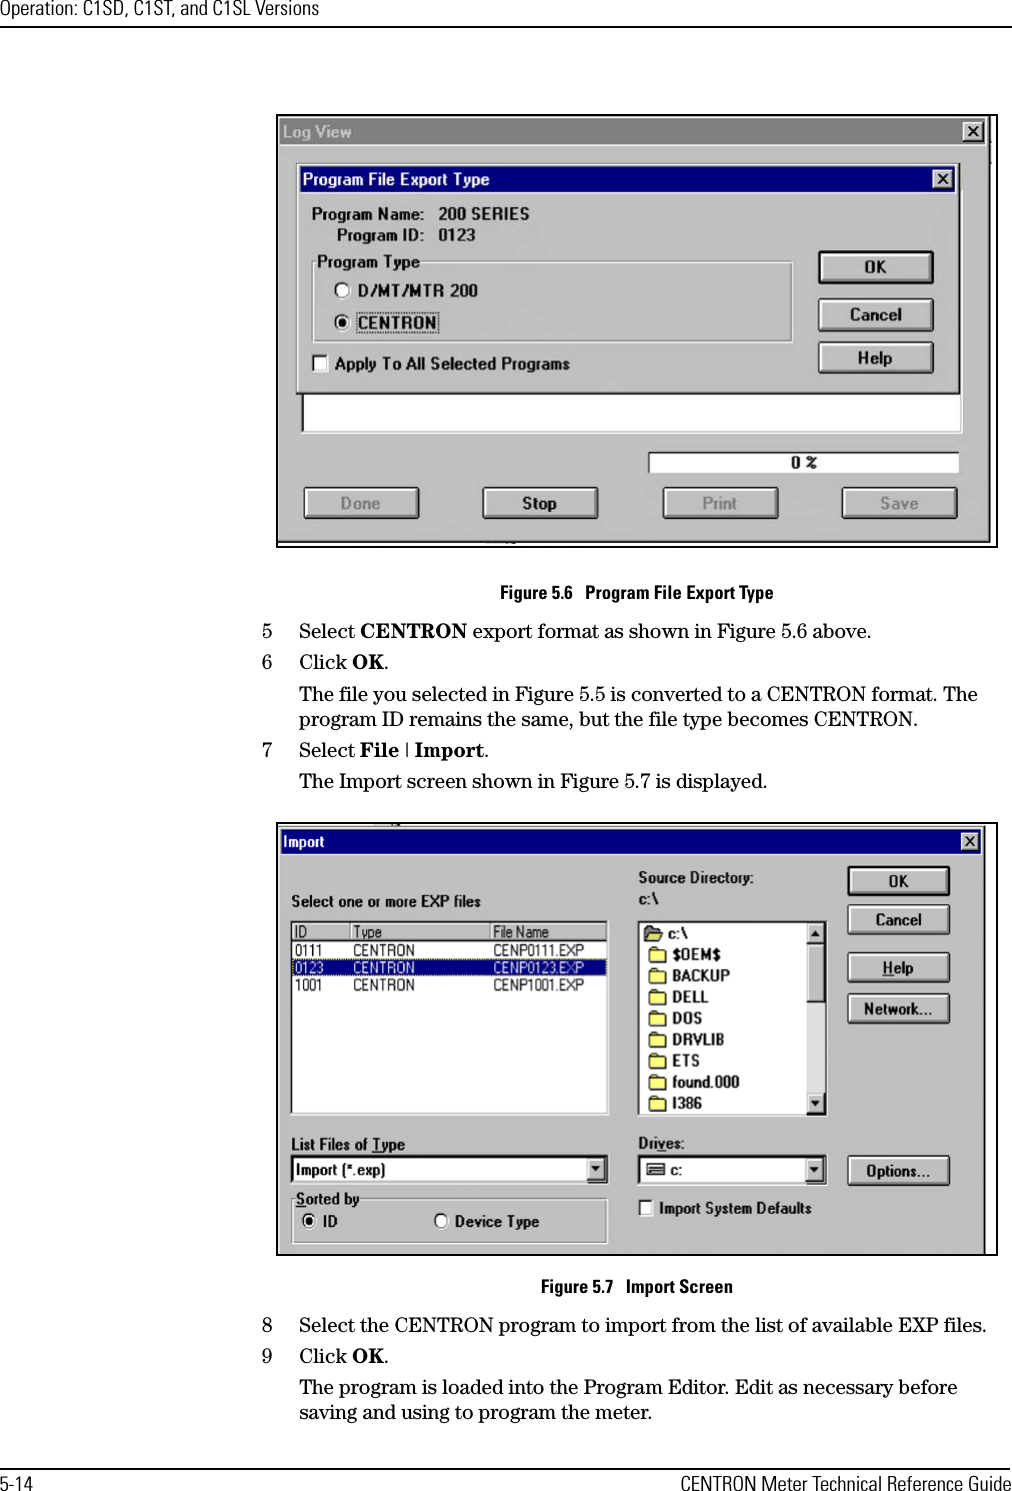 Operation: C1SD, C1ST, and C1SL Versions5-14 CENTRON Meter Technical Reference GuideFigure 5.6   Program File Export Type5 Select CENTRON export format as shown in Figure 5.6 above.6 Click OK.The file you selected in Figure 5.5 is converted to a CENTRON format. The program ID remains the same, but the file type becomes CENTRON.7 Select File | Import.The Import screen shown in Figure 5.7 is displayed.Figure 5.7   Import Screen8 Select the CENTRON program to import from the list of available EXP files.9 Click OK.The program is loaded into the Program Editor. Edit as necessary before saving and using to program the meter.